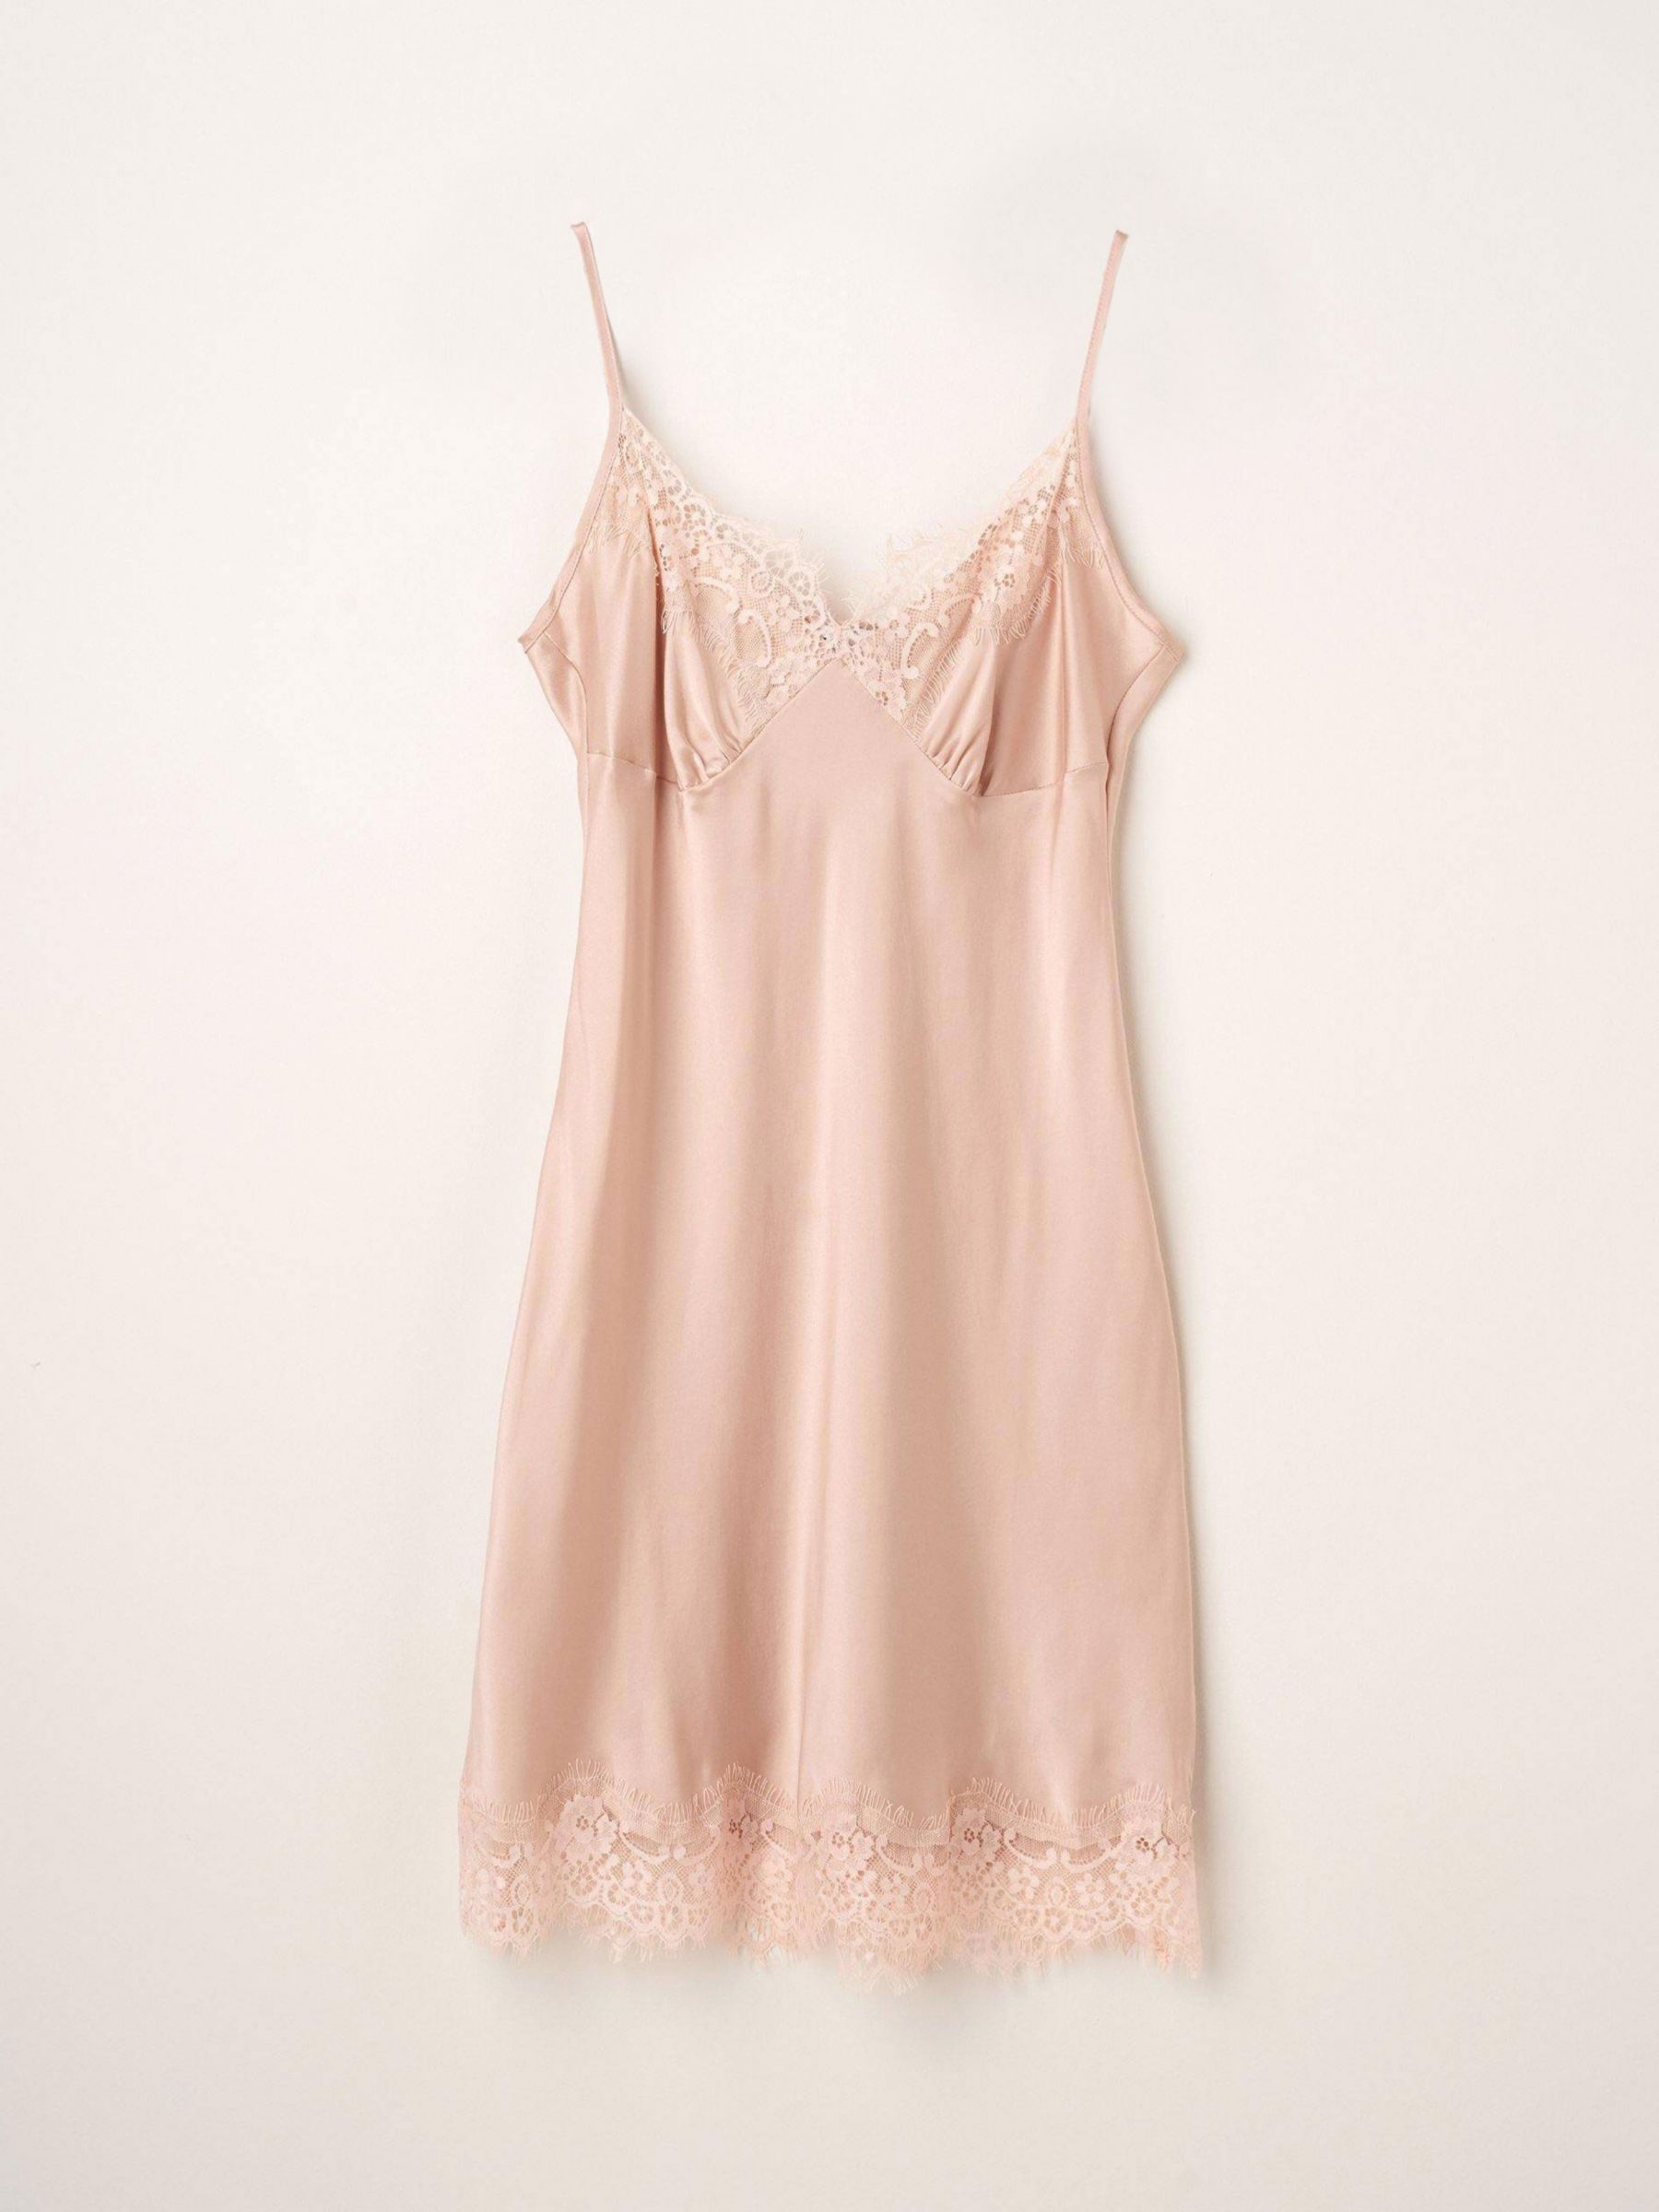 Mesh chemise with contrast lace trim 56071-PINK/NYELLOW 